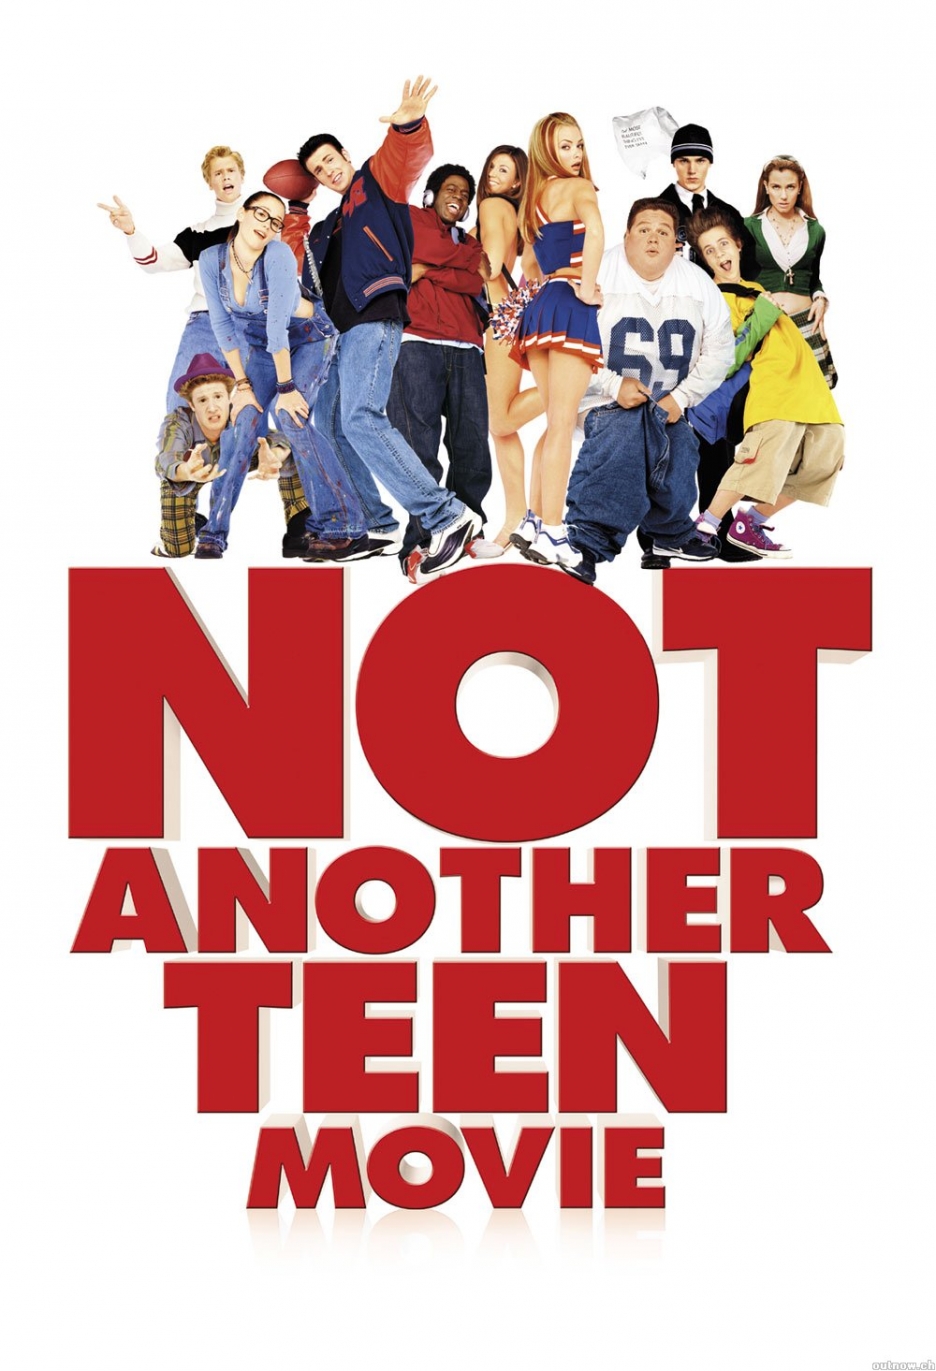 Not A Nother Teen Movie 82